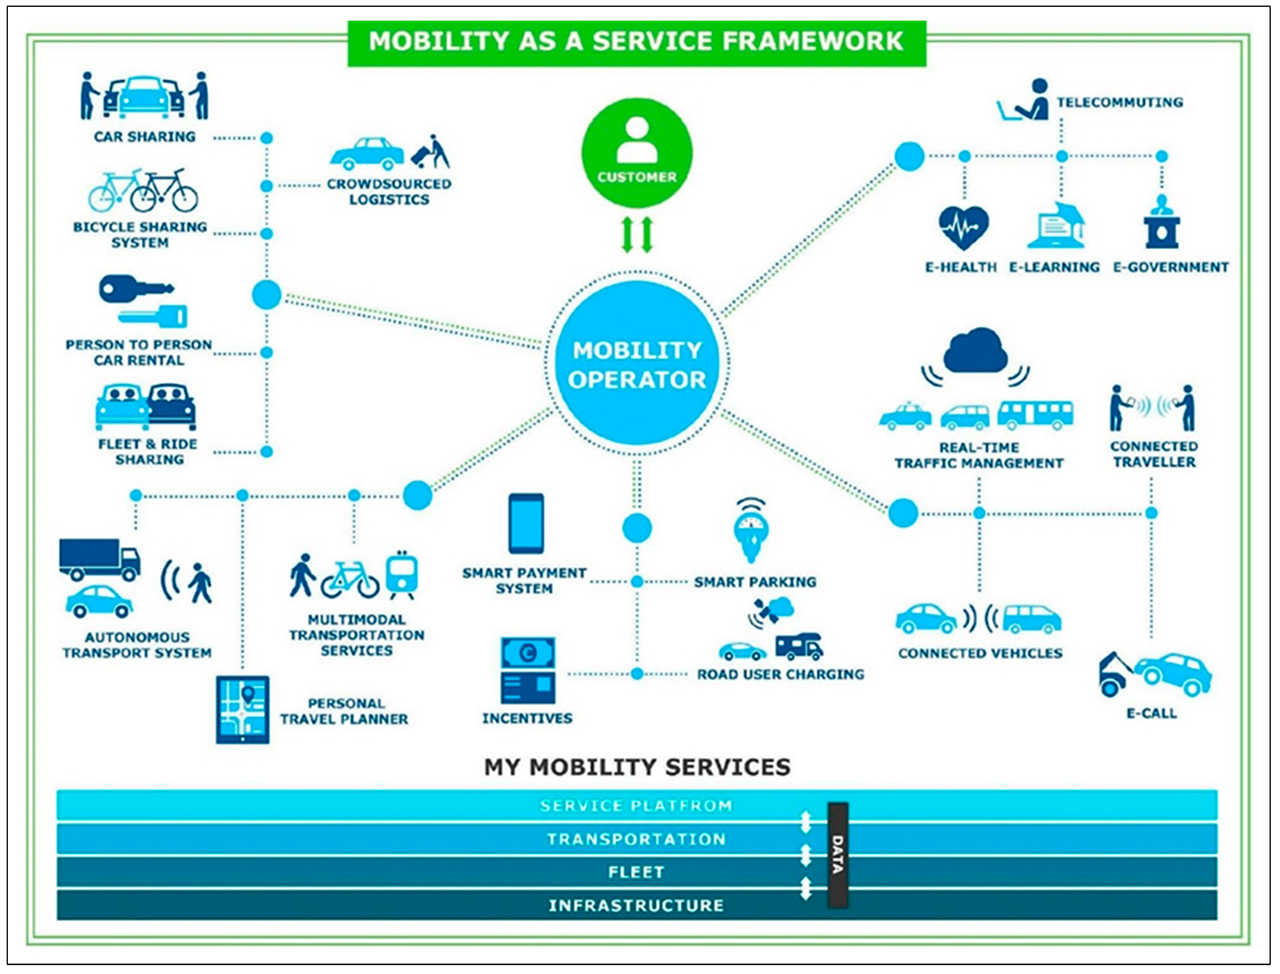 State of the Art of Mobility as a Service (MaaS) Ecosystems and Architectures—An Overview of, and a Definition, Ecosystem and System Architecture for Electric Mobility as a Service (eMaaS)